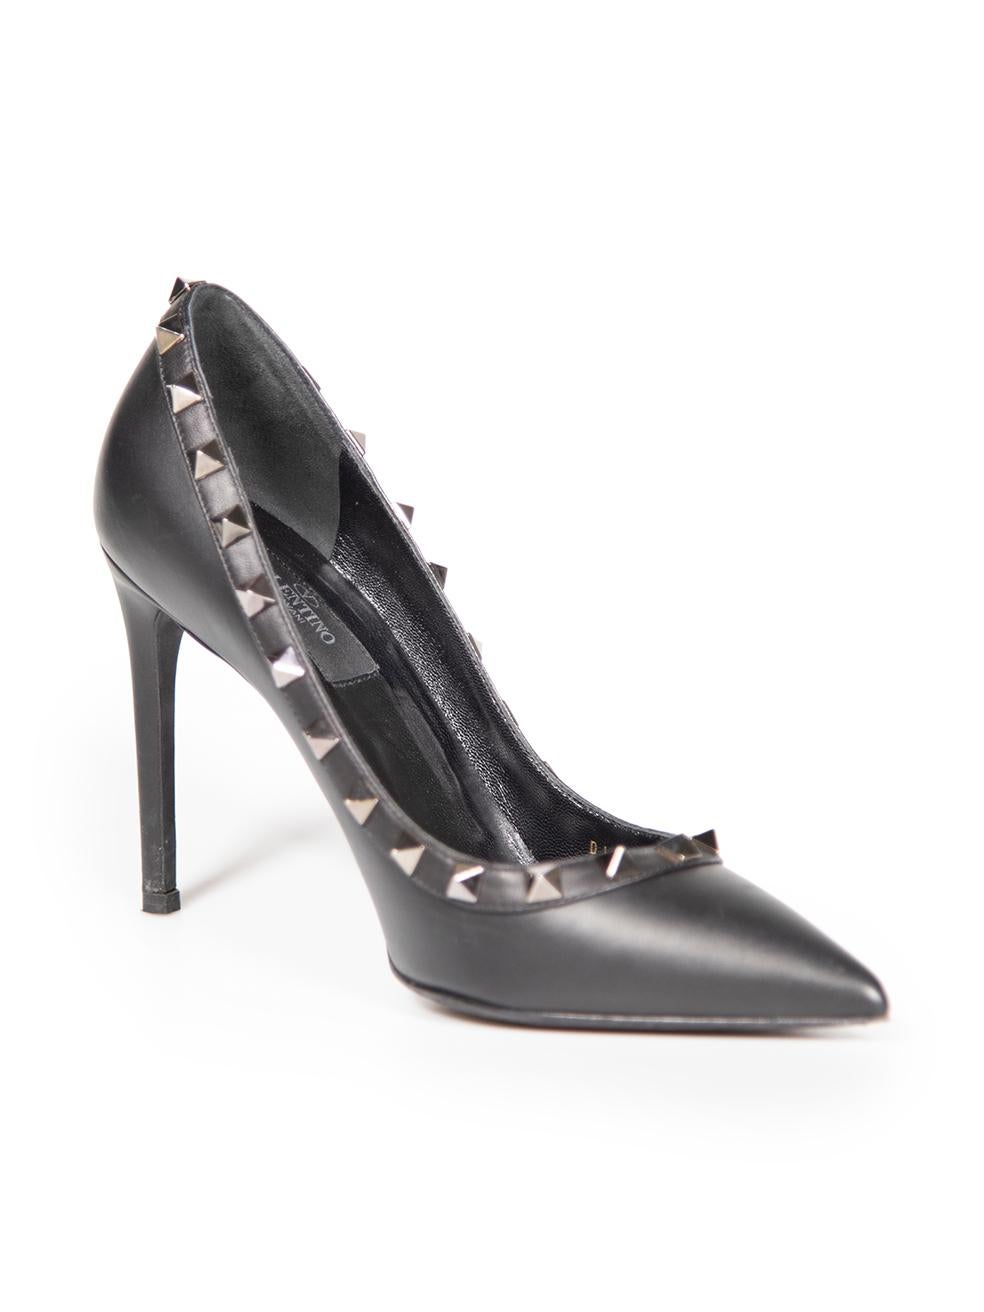 CONDITION is Very good. Minimal wear to shoes is evident. Minimal wear to both shoe heels with abrasions to the leather on this used Valentino designer resale item. These shoes come with original box.
 
 Details
 Black
 Leather
 Pumps
 Point toe
